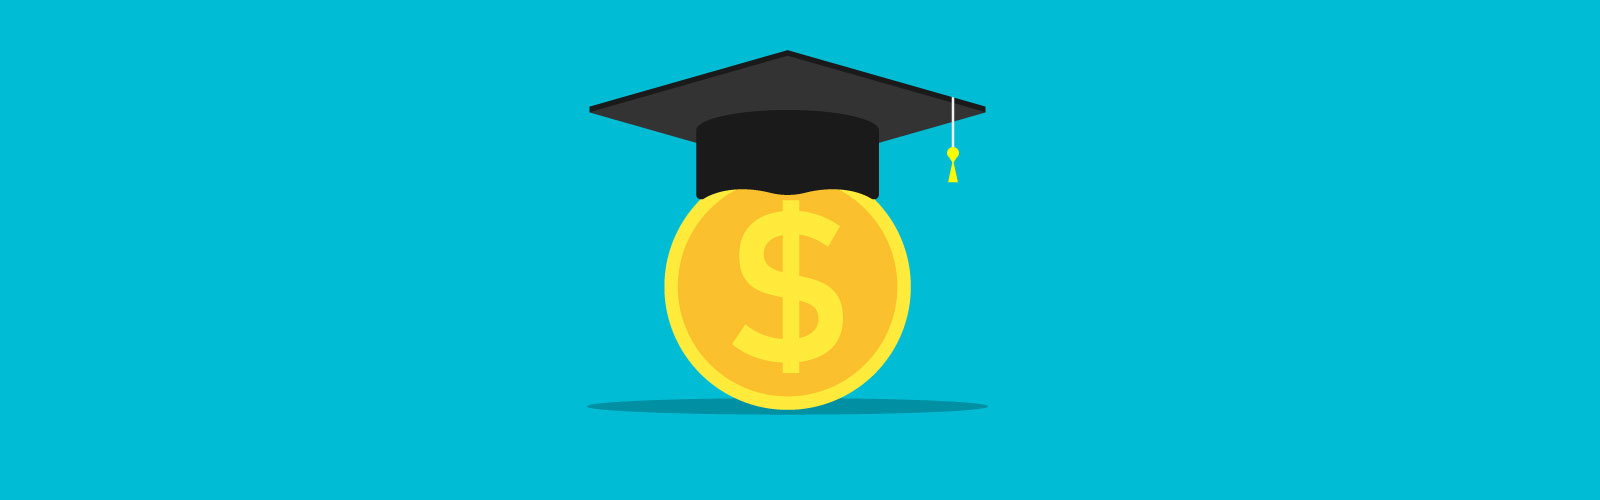 Large yellow coin with dollar sign, wearing a graduation cap